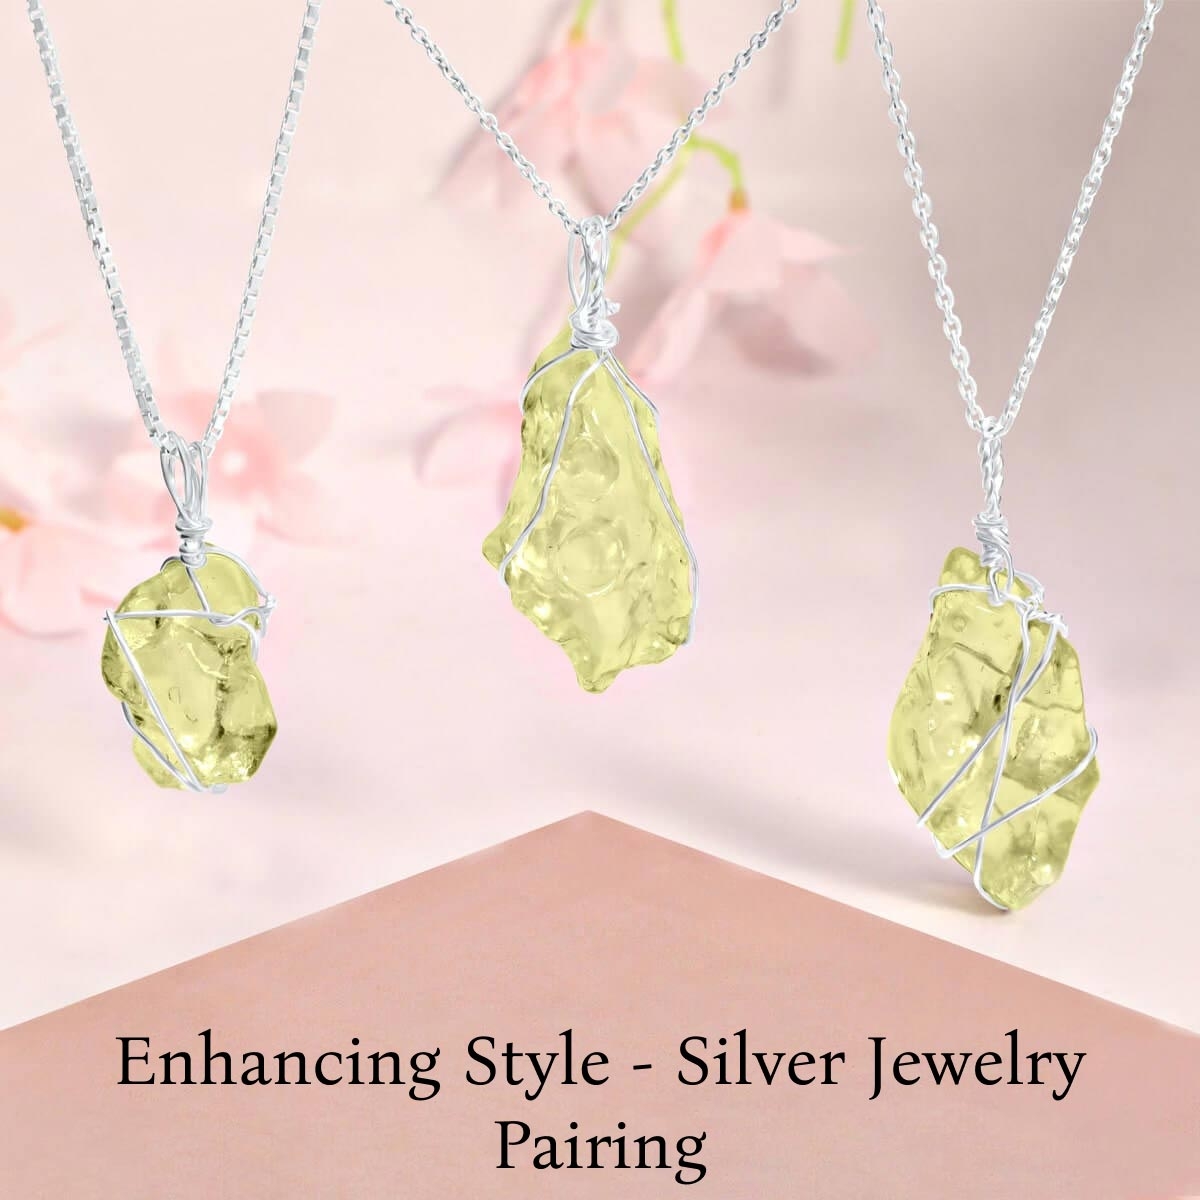 Pairing it with Sterling Silver Jewelry